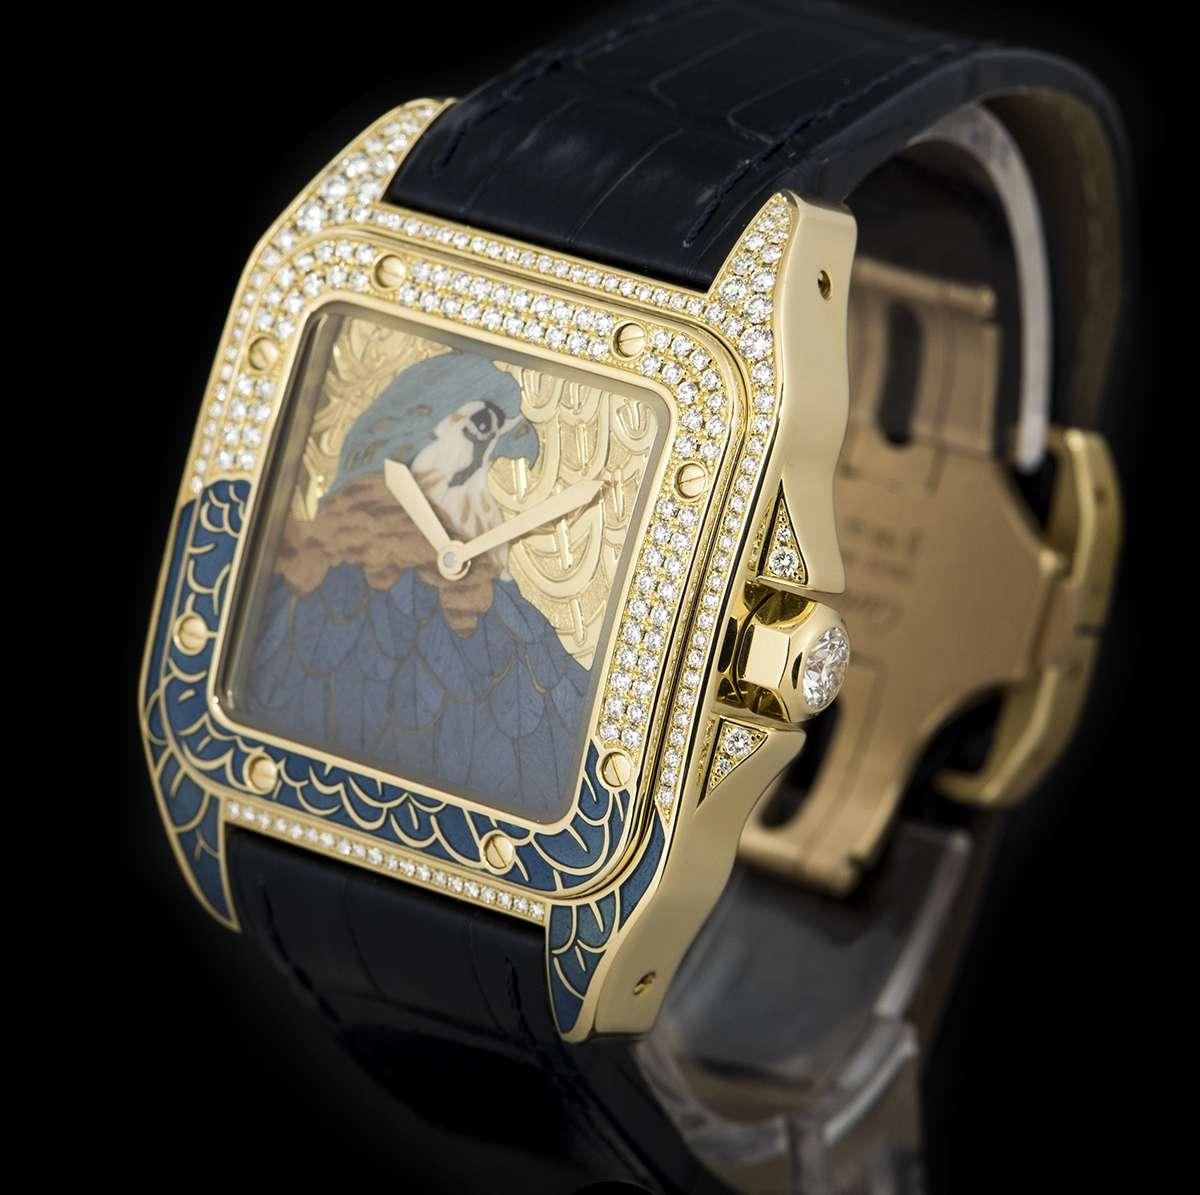 An 18k Yellow Gold Limited Edition Falcon D'Art Santos 100 Gents Wristwatch, enamel dial emblazoned with falcon motif, a fixed 18k yellow gold bezel set with approximately 72 round brilliant cut diamonds, 18k yellow gold case and 18k yellow gold